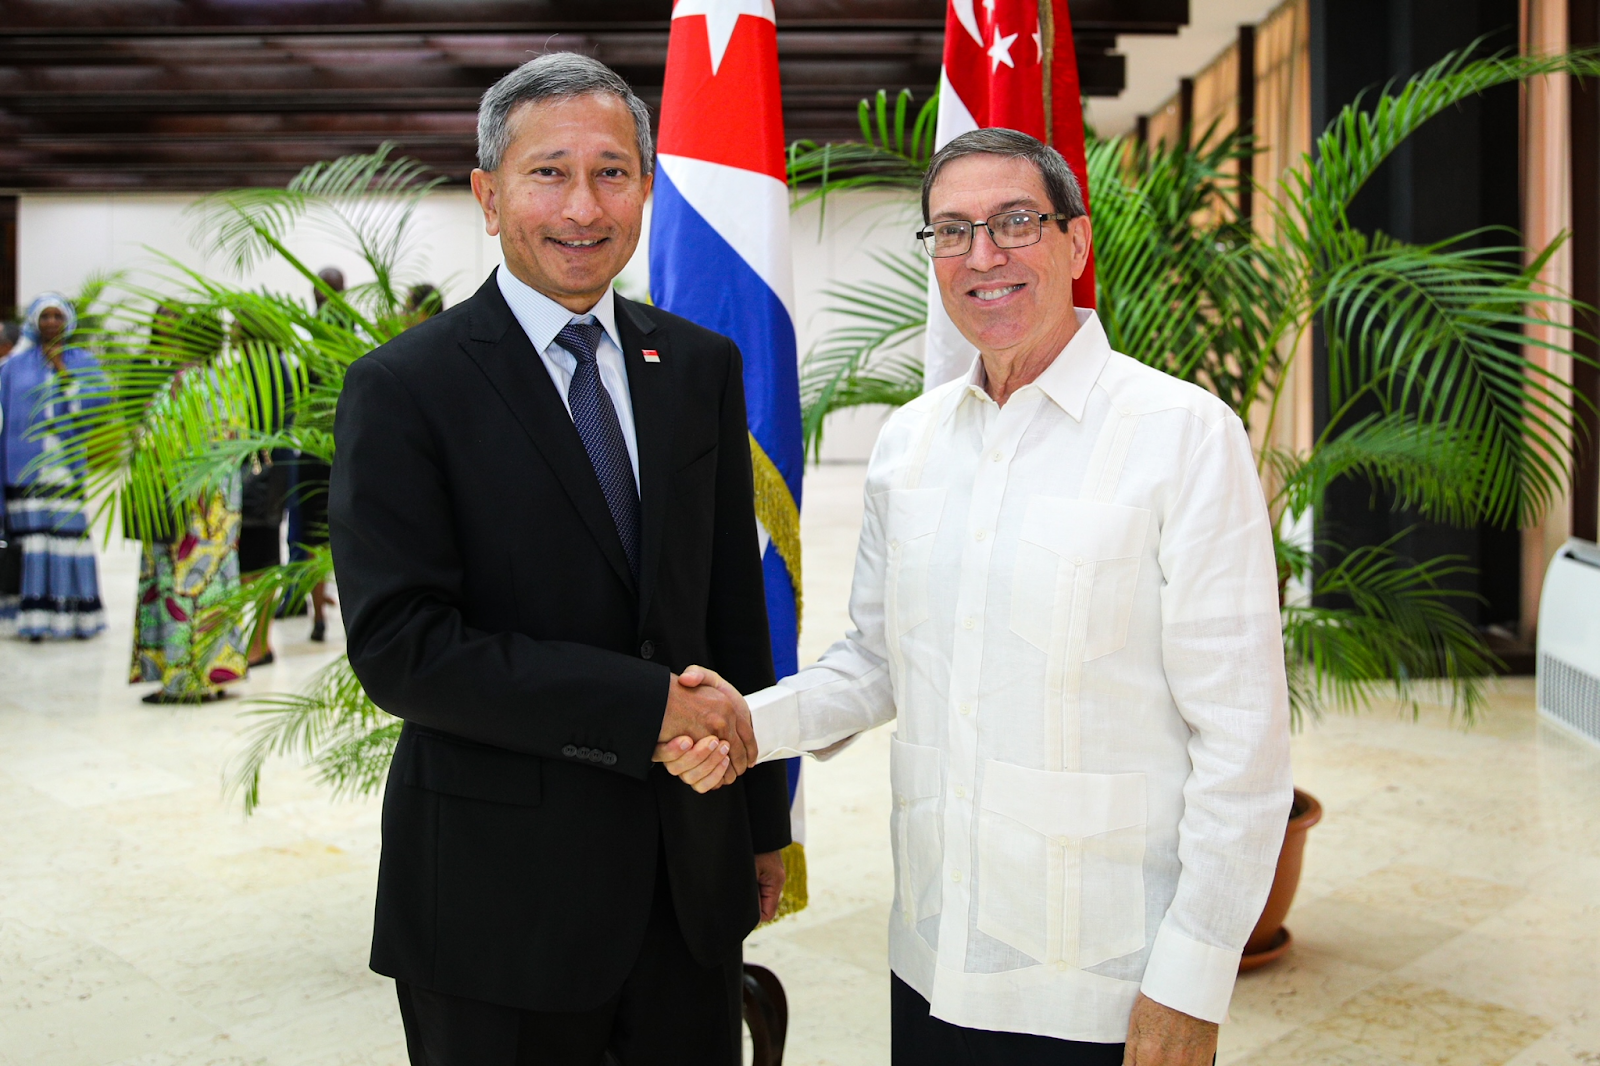 Singapore and Cuba Warm-up Relations - Asiana Times